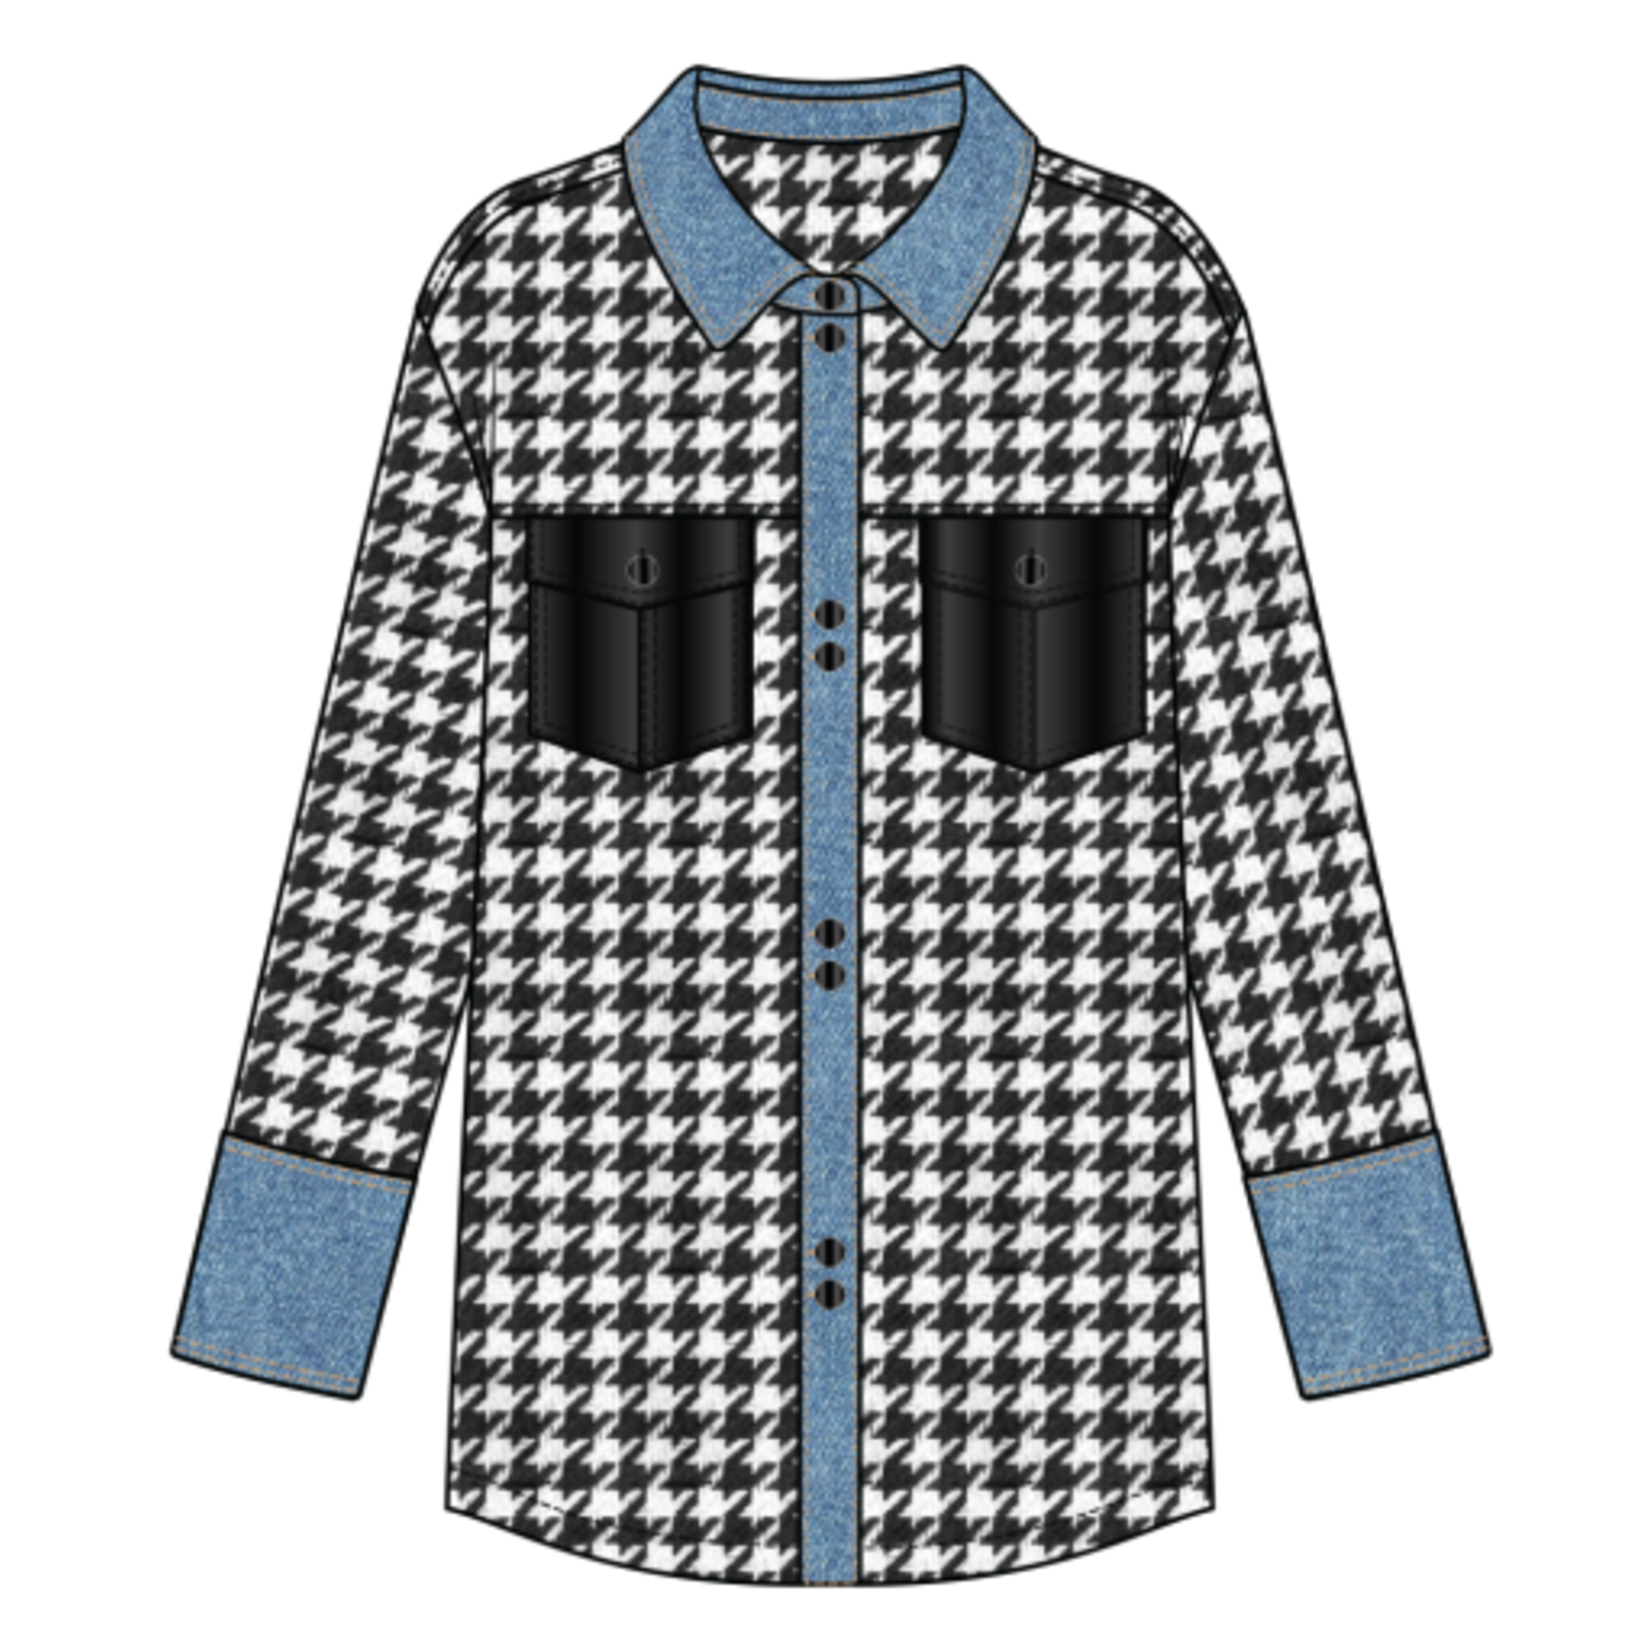 Tribal Button Up Houndstooth Jacket